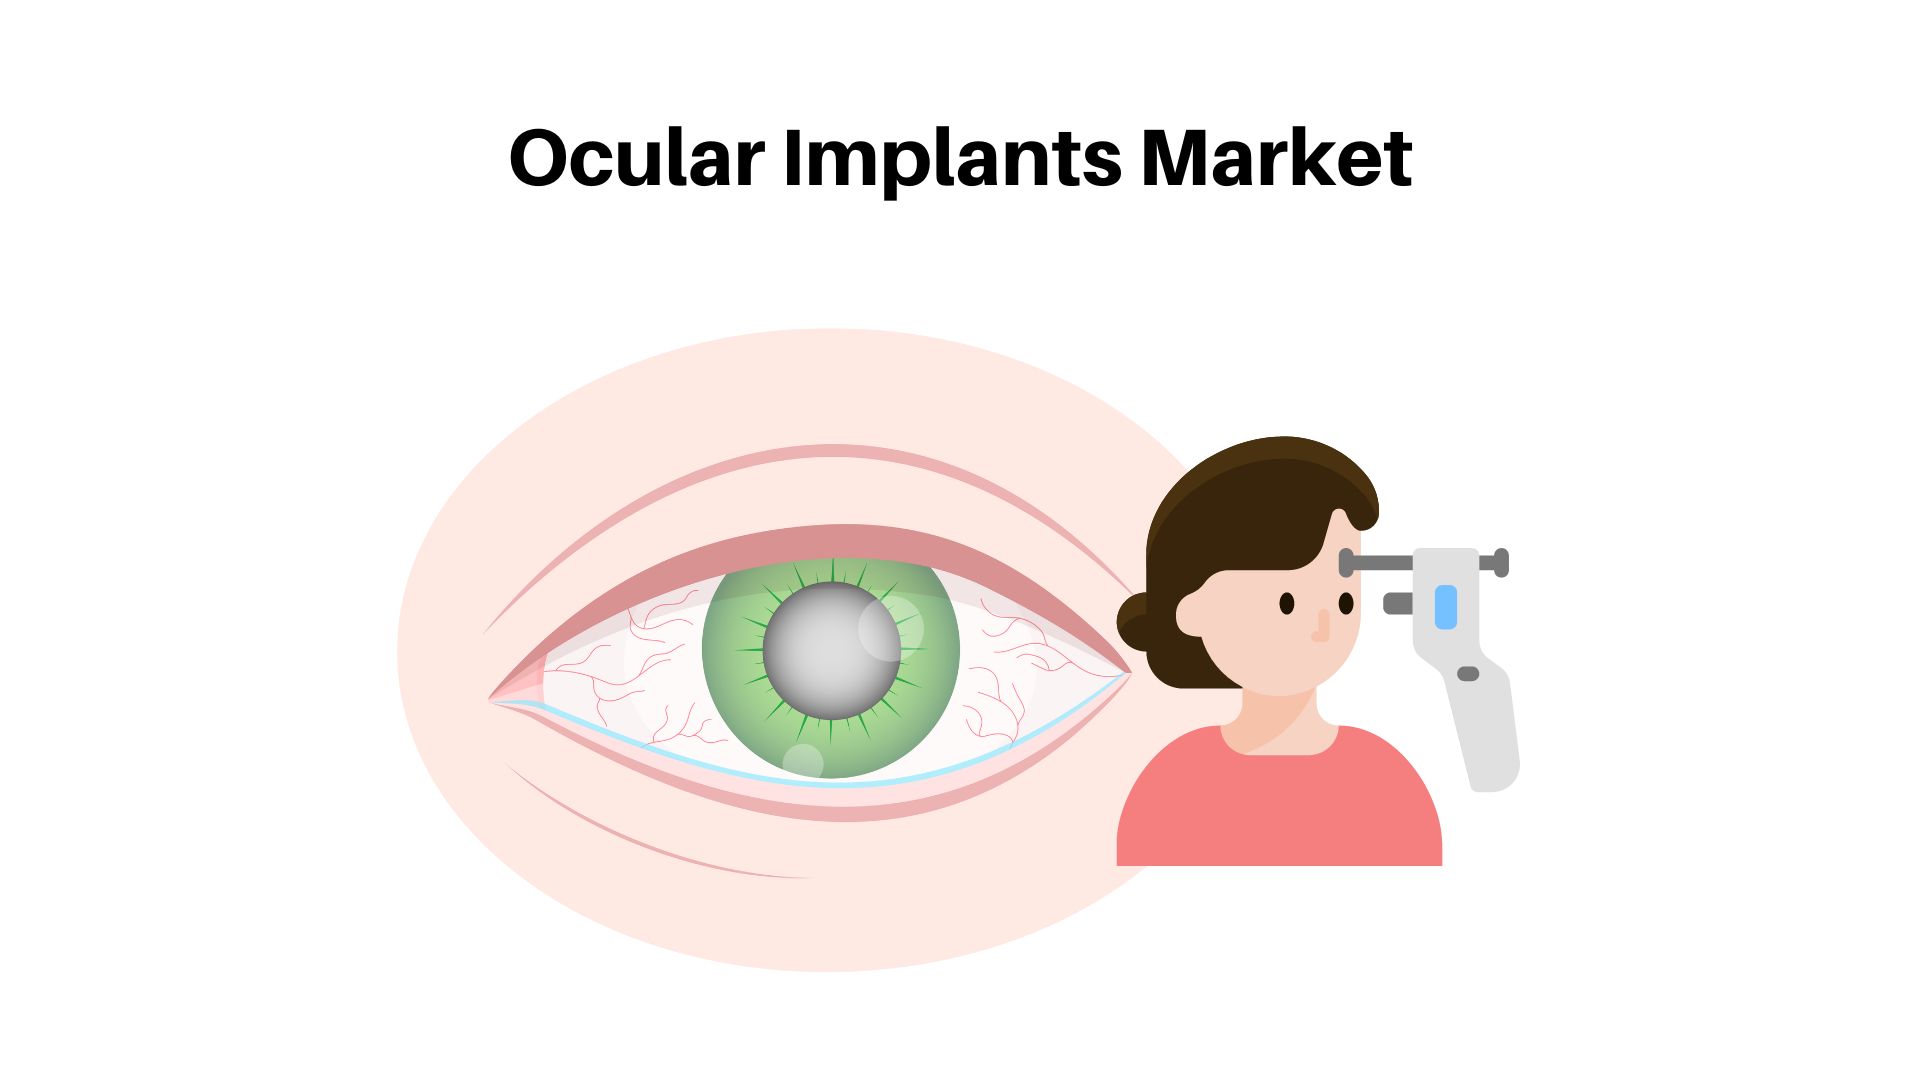 Ocular Implants Market Size USD 24.3 Billion | Annual Growth Rate of 5.8% by 2032